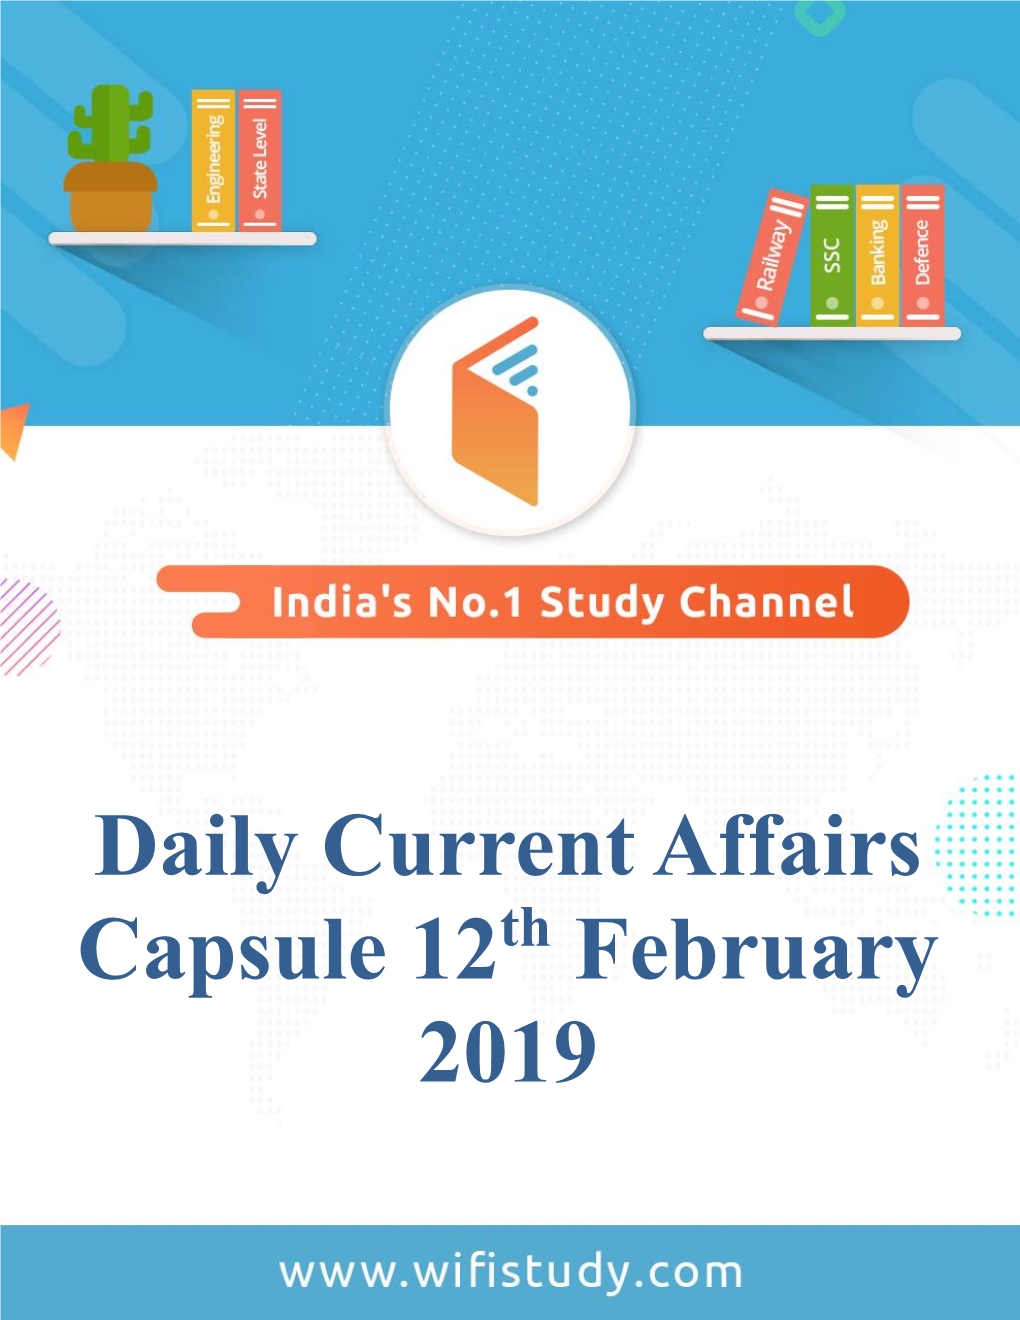 Daily Current Affairs Capsule 12 February 2019